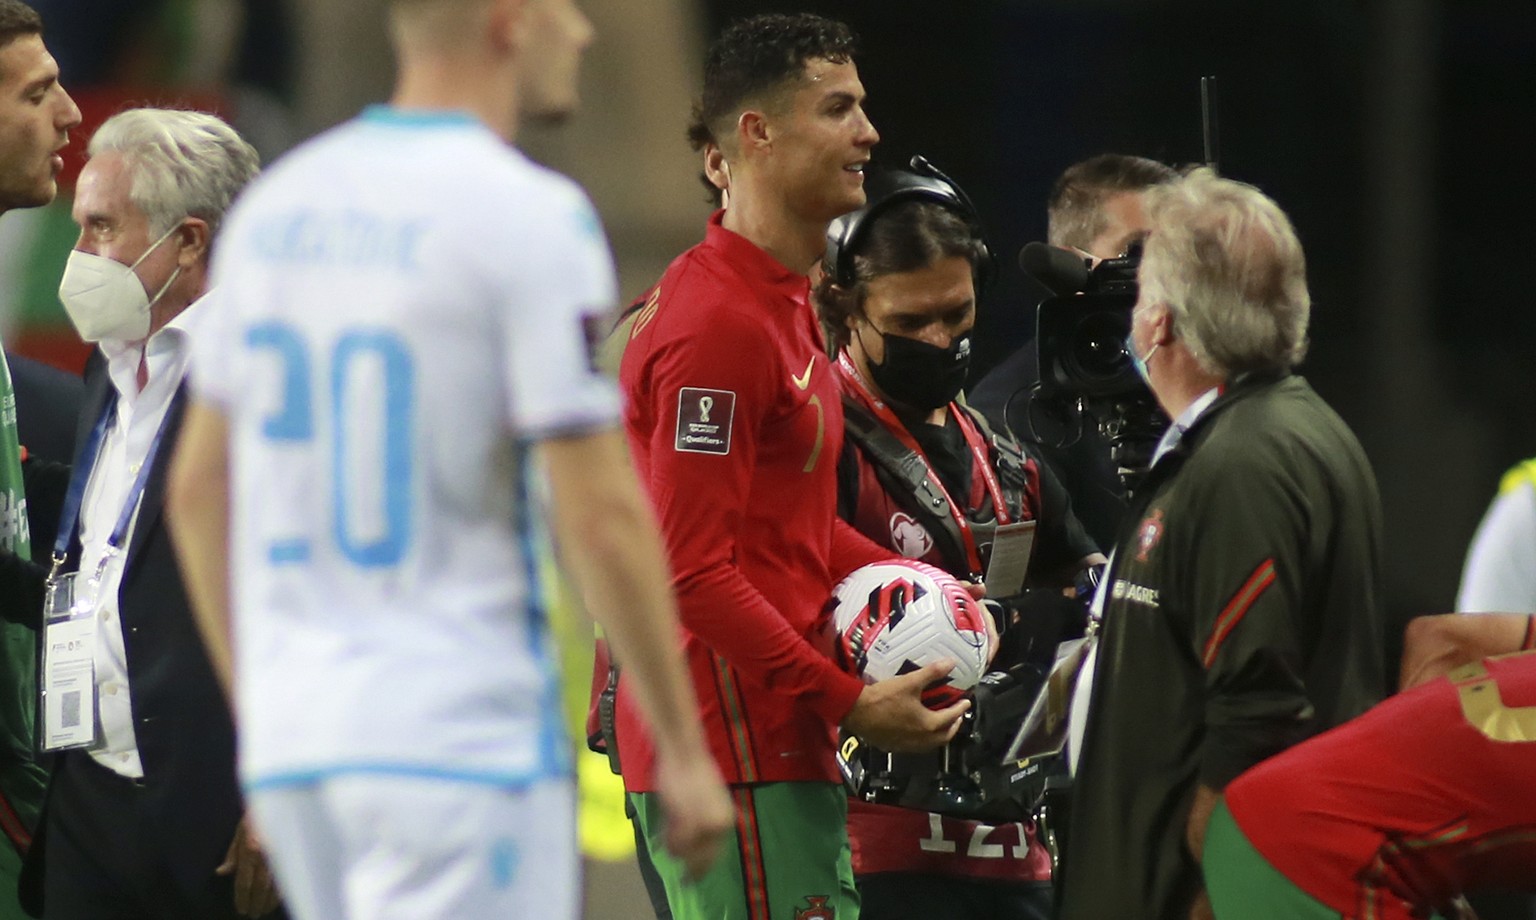 Portugal's Cristiano Ronaldo leaves the field with the match ball after scoring a hat-trick during the World Cup 2022 group A qualifying soccer match between Portugal and Luxembourg at the Algarve sta ...